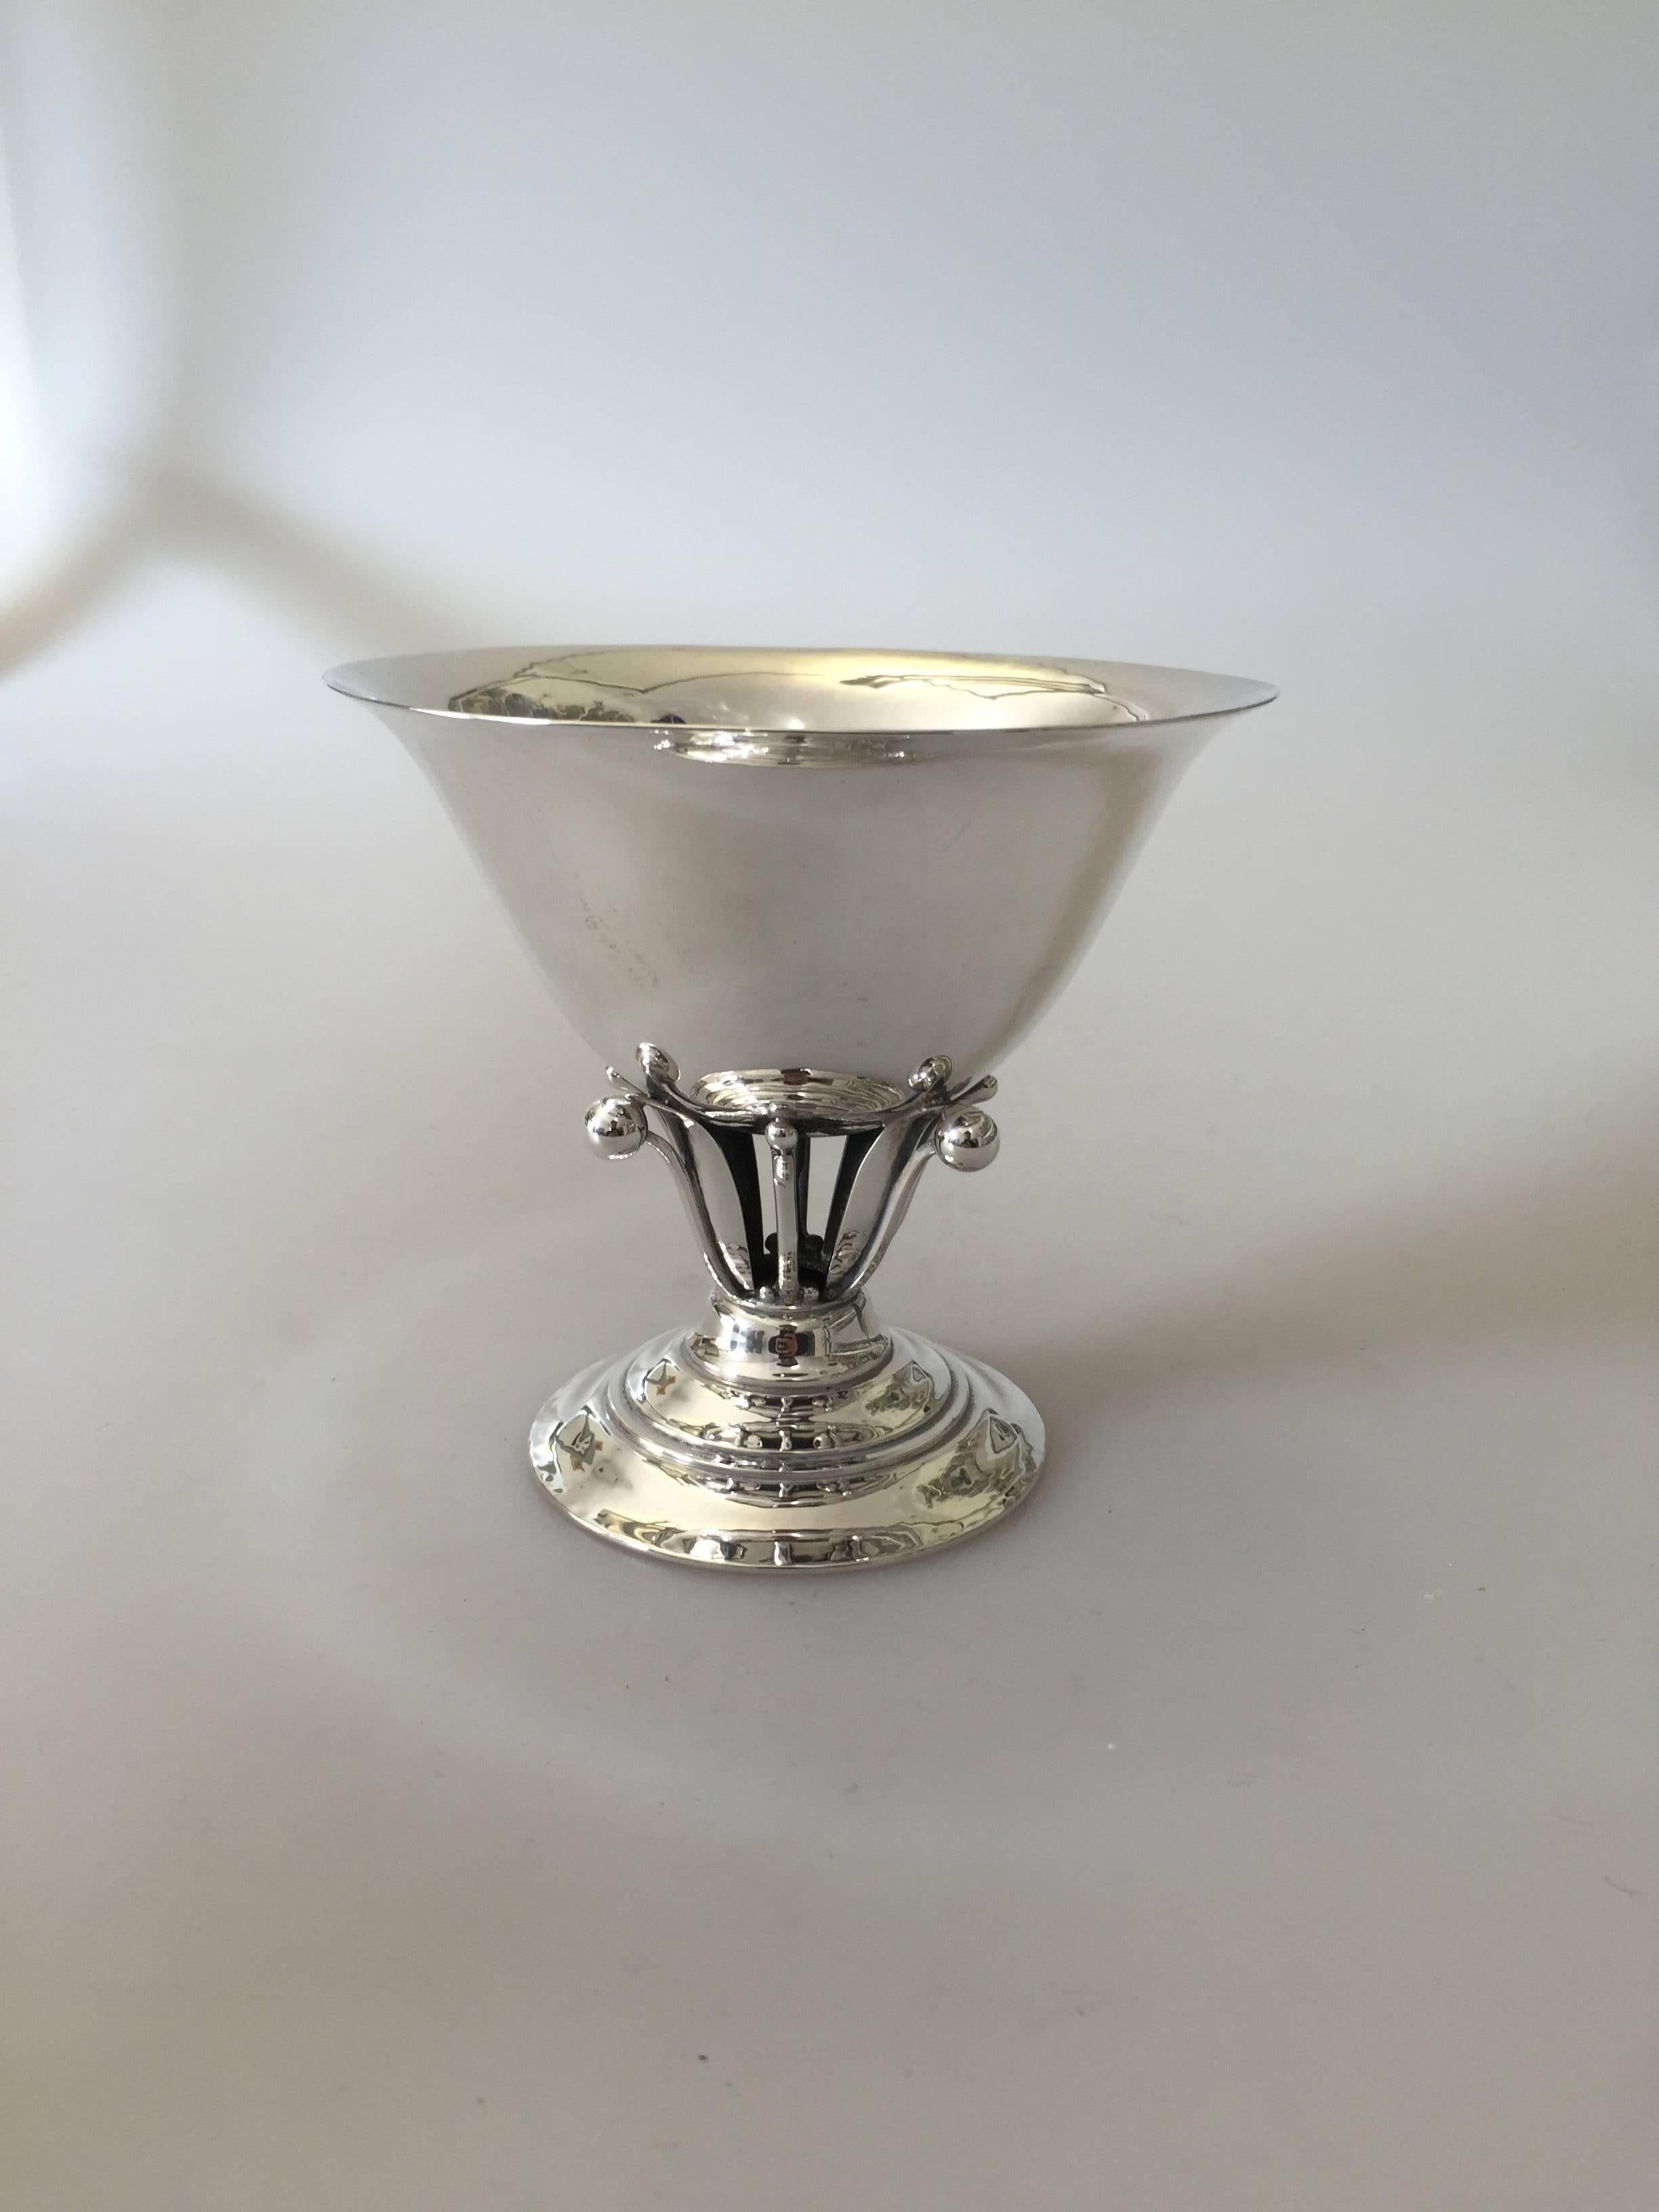 Georg Jensen footed bowl that is lifted on a floral pedestal, designed 1912 by Johan Rohde. 

Johan Rohde designed products for Georg Jensen Silver Smithy, beginning in 1906. Rohde's designs have much in common with Georg Jensen's own as in they